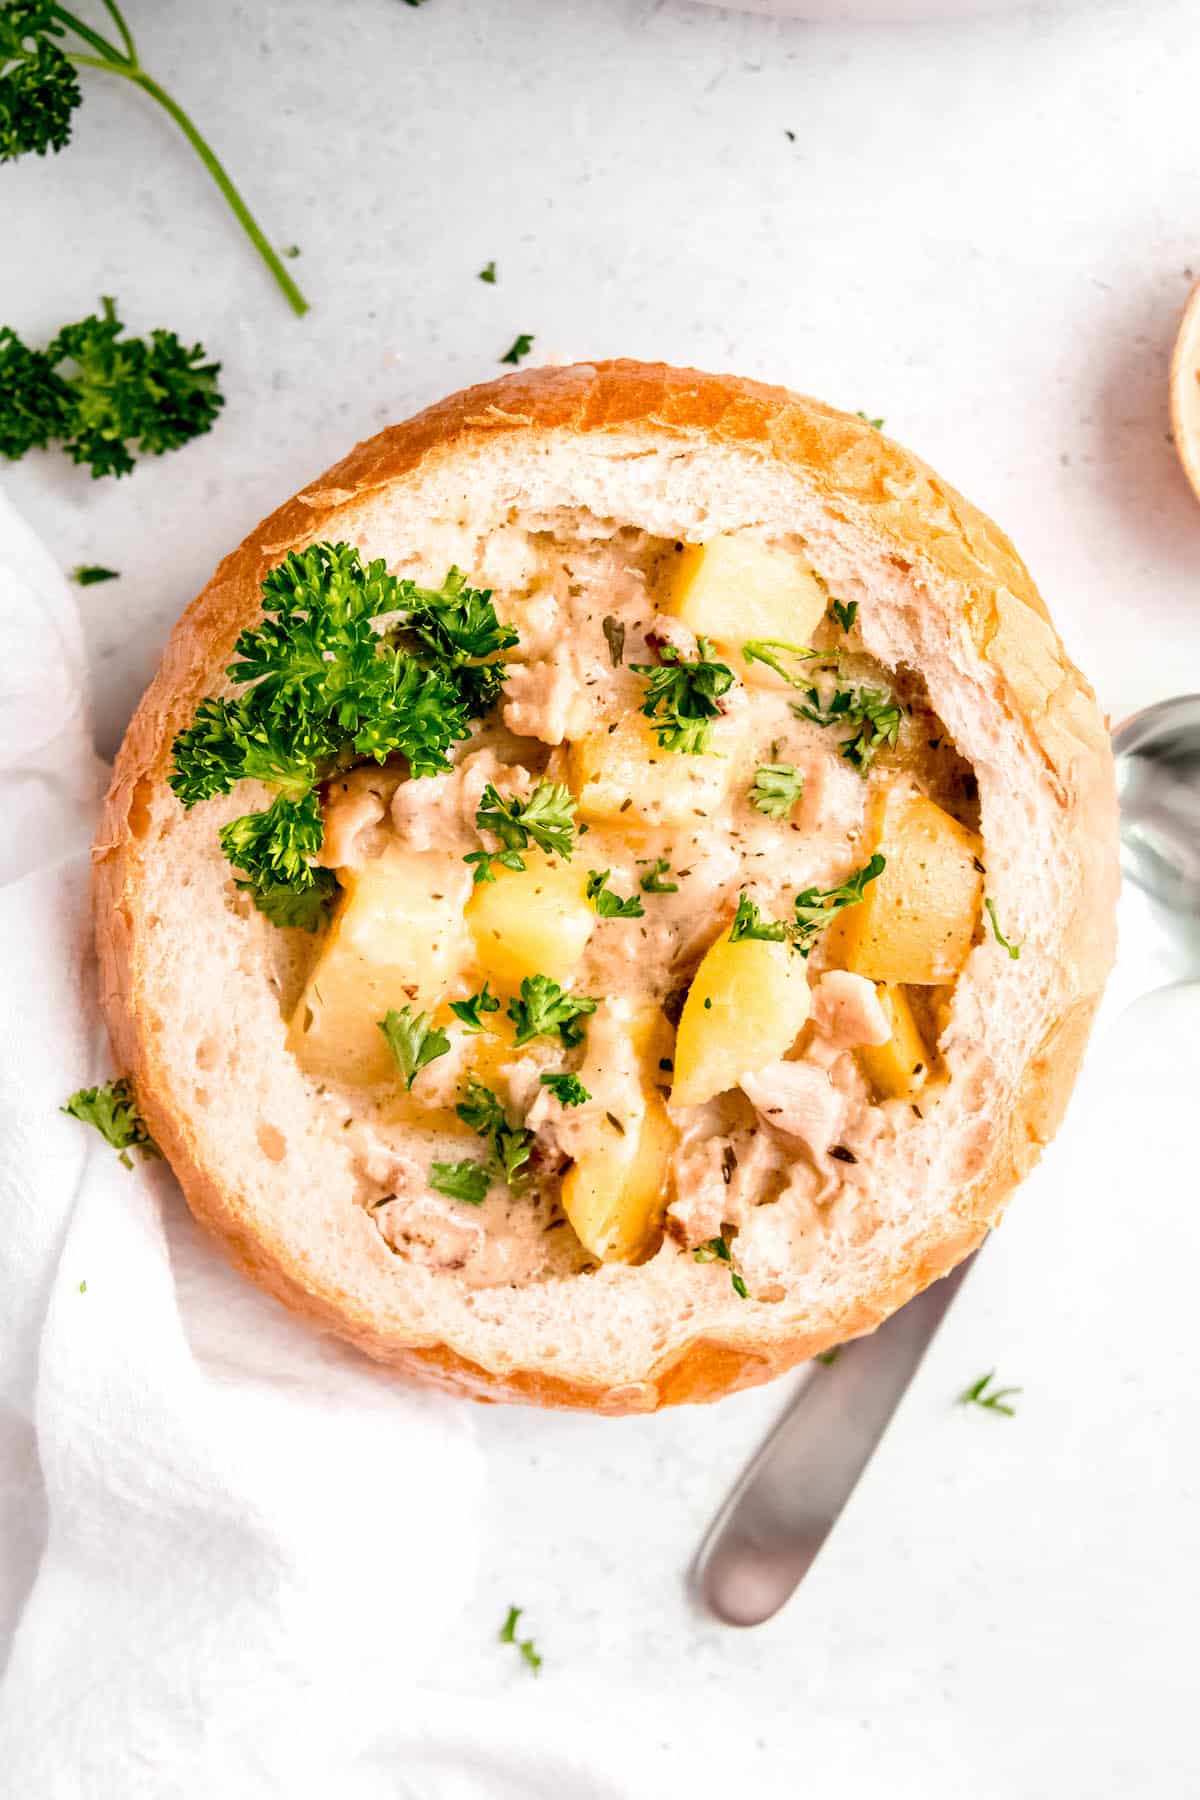 bread bowl filled with clam chowder on a white table with a silver spoon and parsley scattered around.